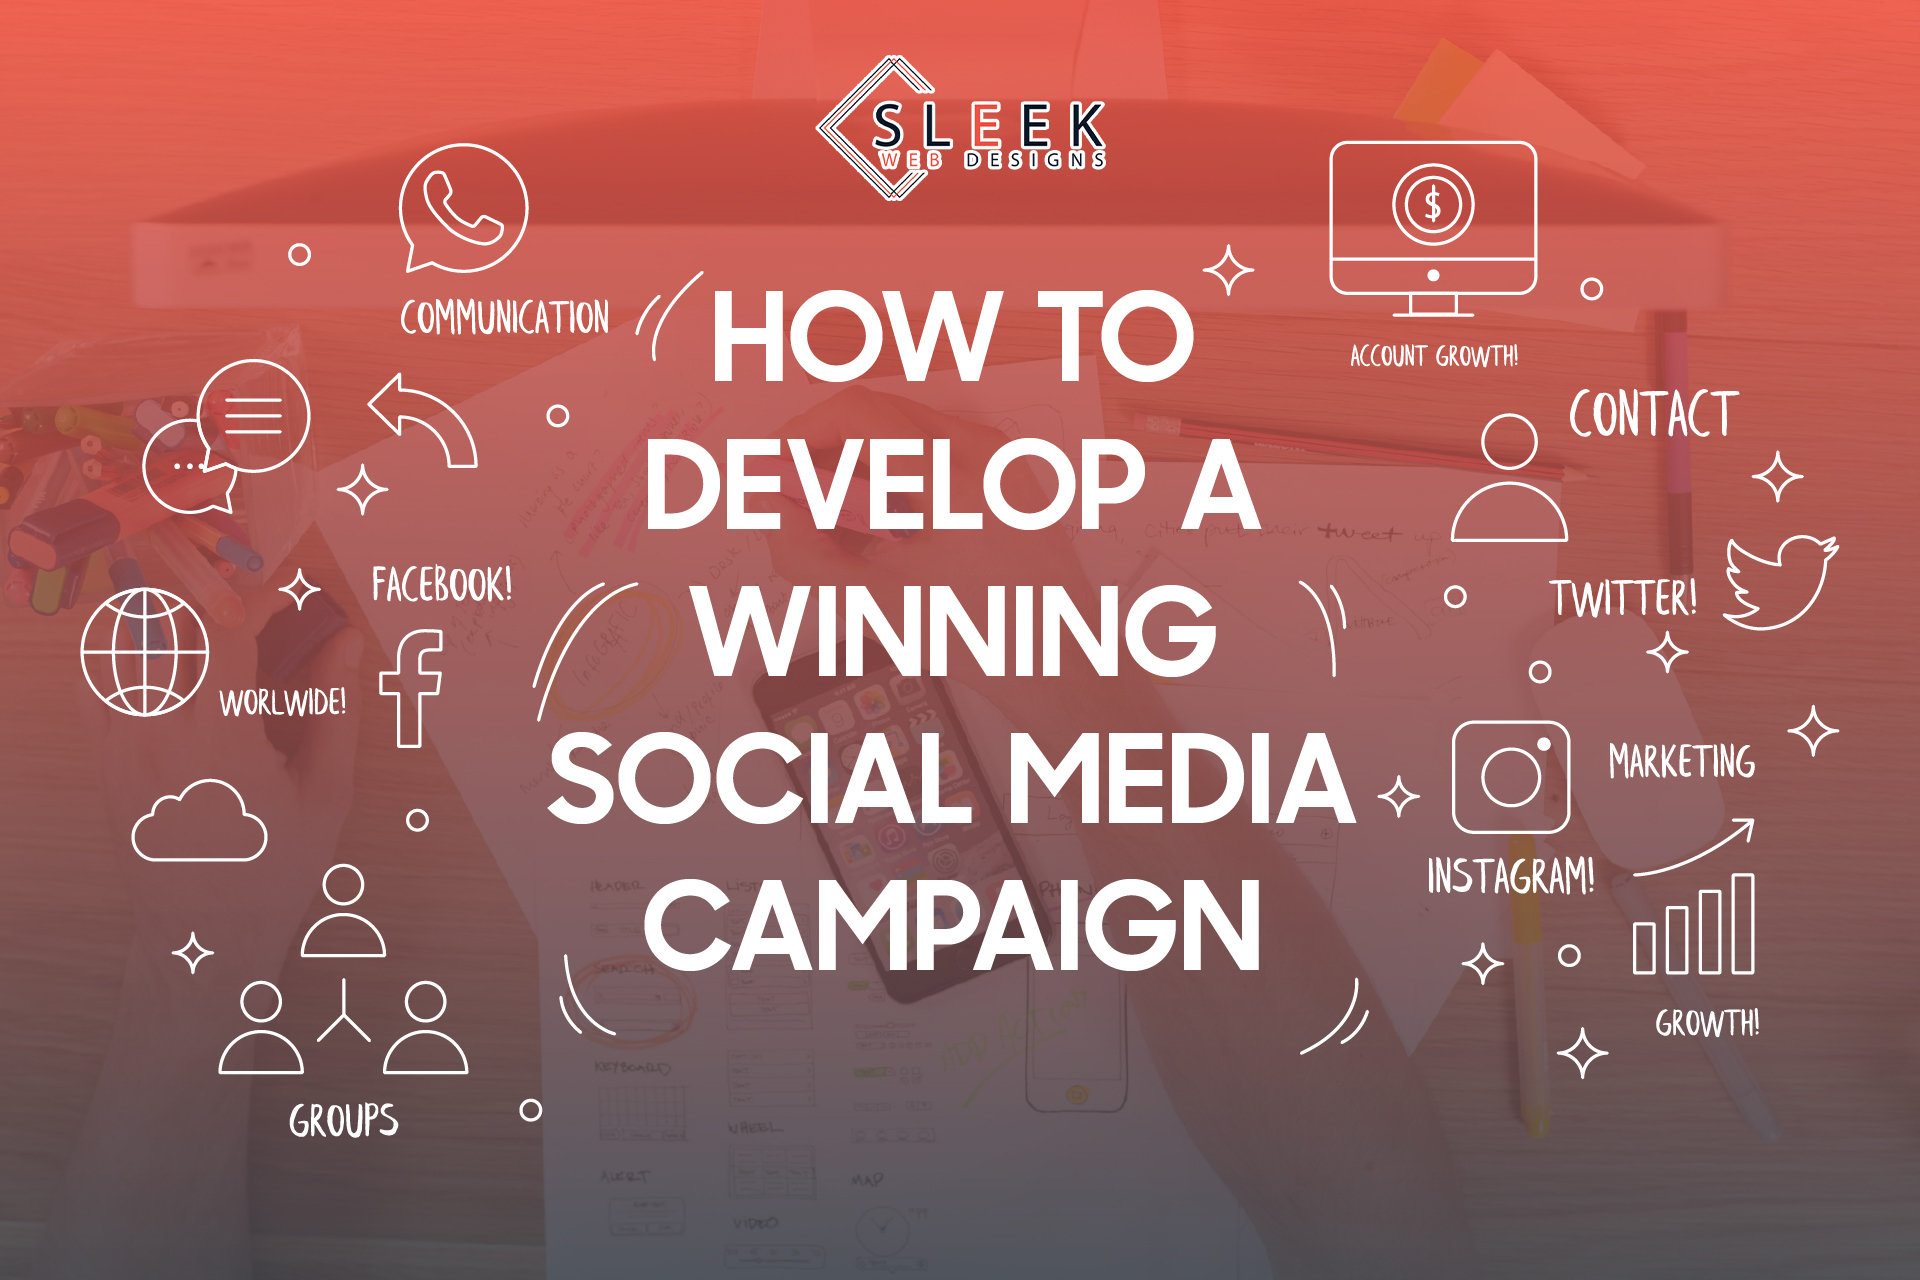 How to develop a winning social media campaign